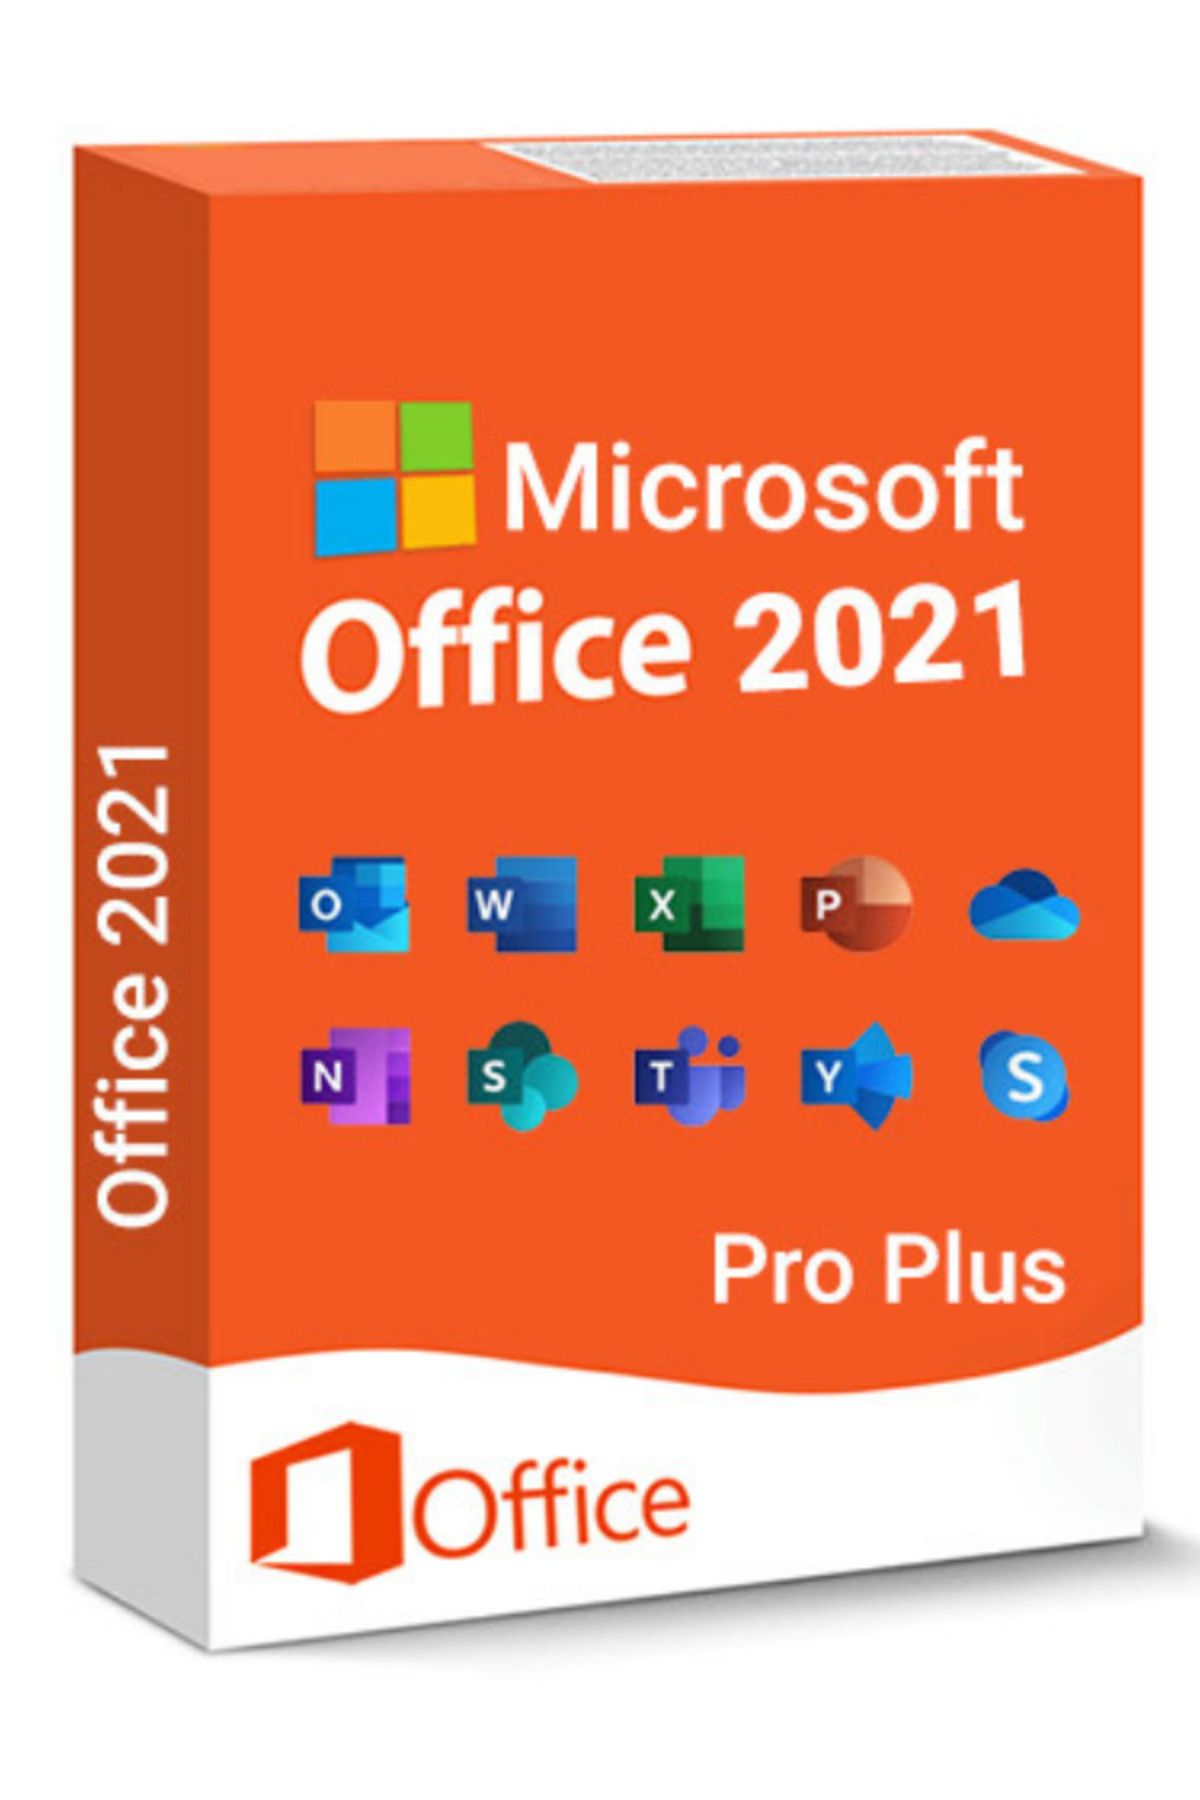 Home business 2021. Office 2021 professional Plus. Office 2021 Pro. Коробка Office 2021 professional Plus. Office 2021 Pro Plus Office 2019 Pro Plus.